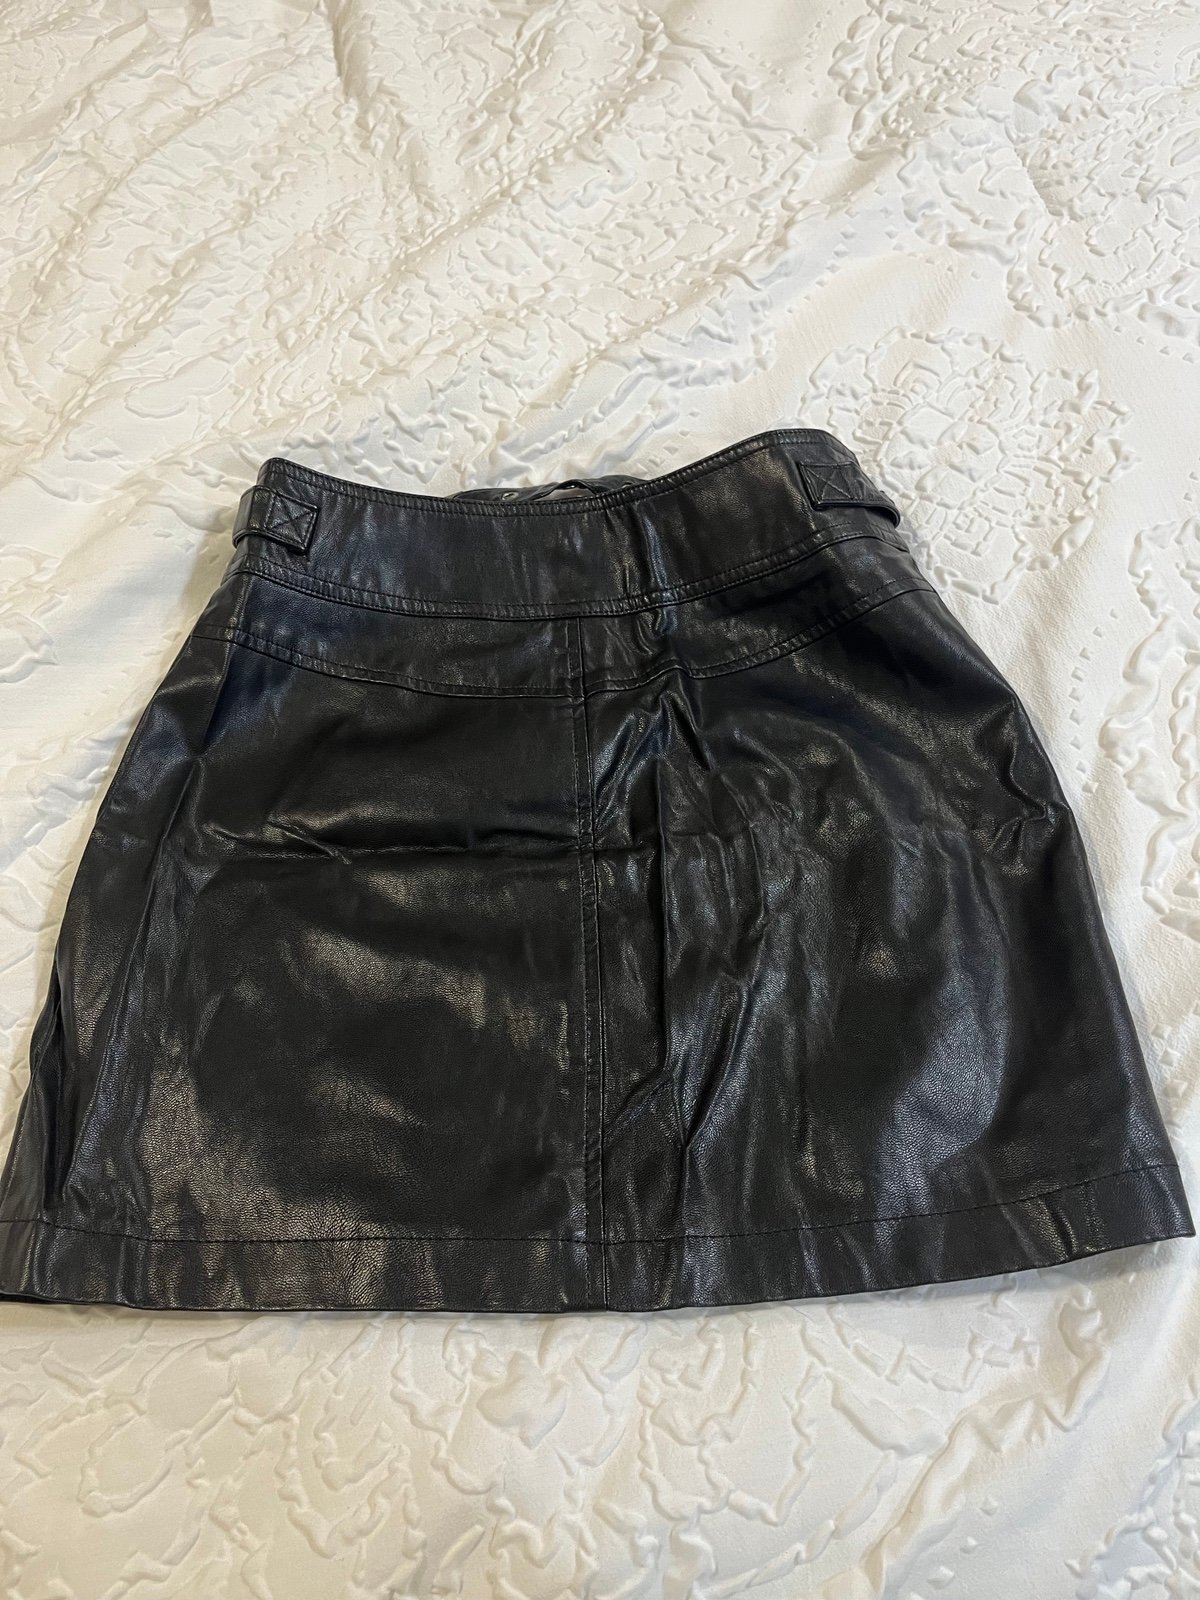 floor price Forever 21 black faux leather Skirt size Small plpnnmNyK for sale